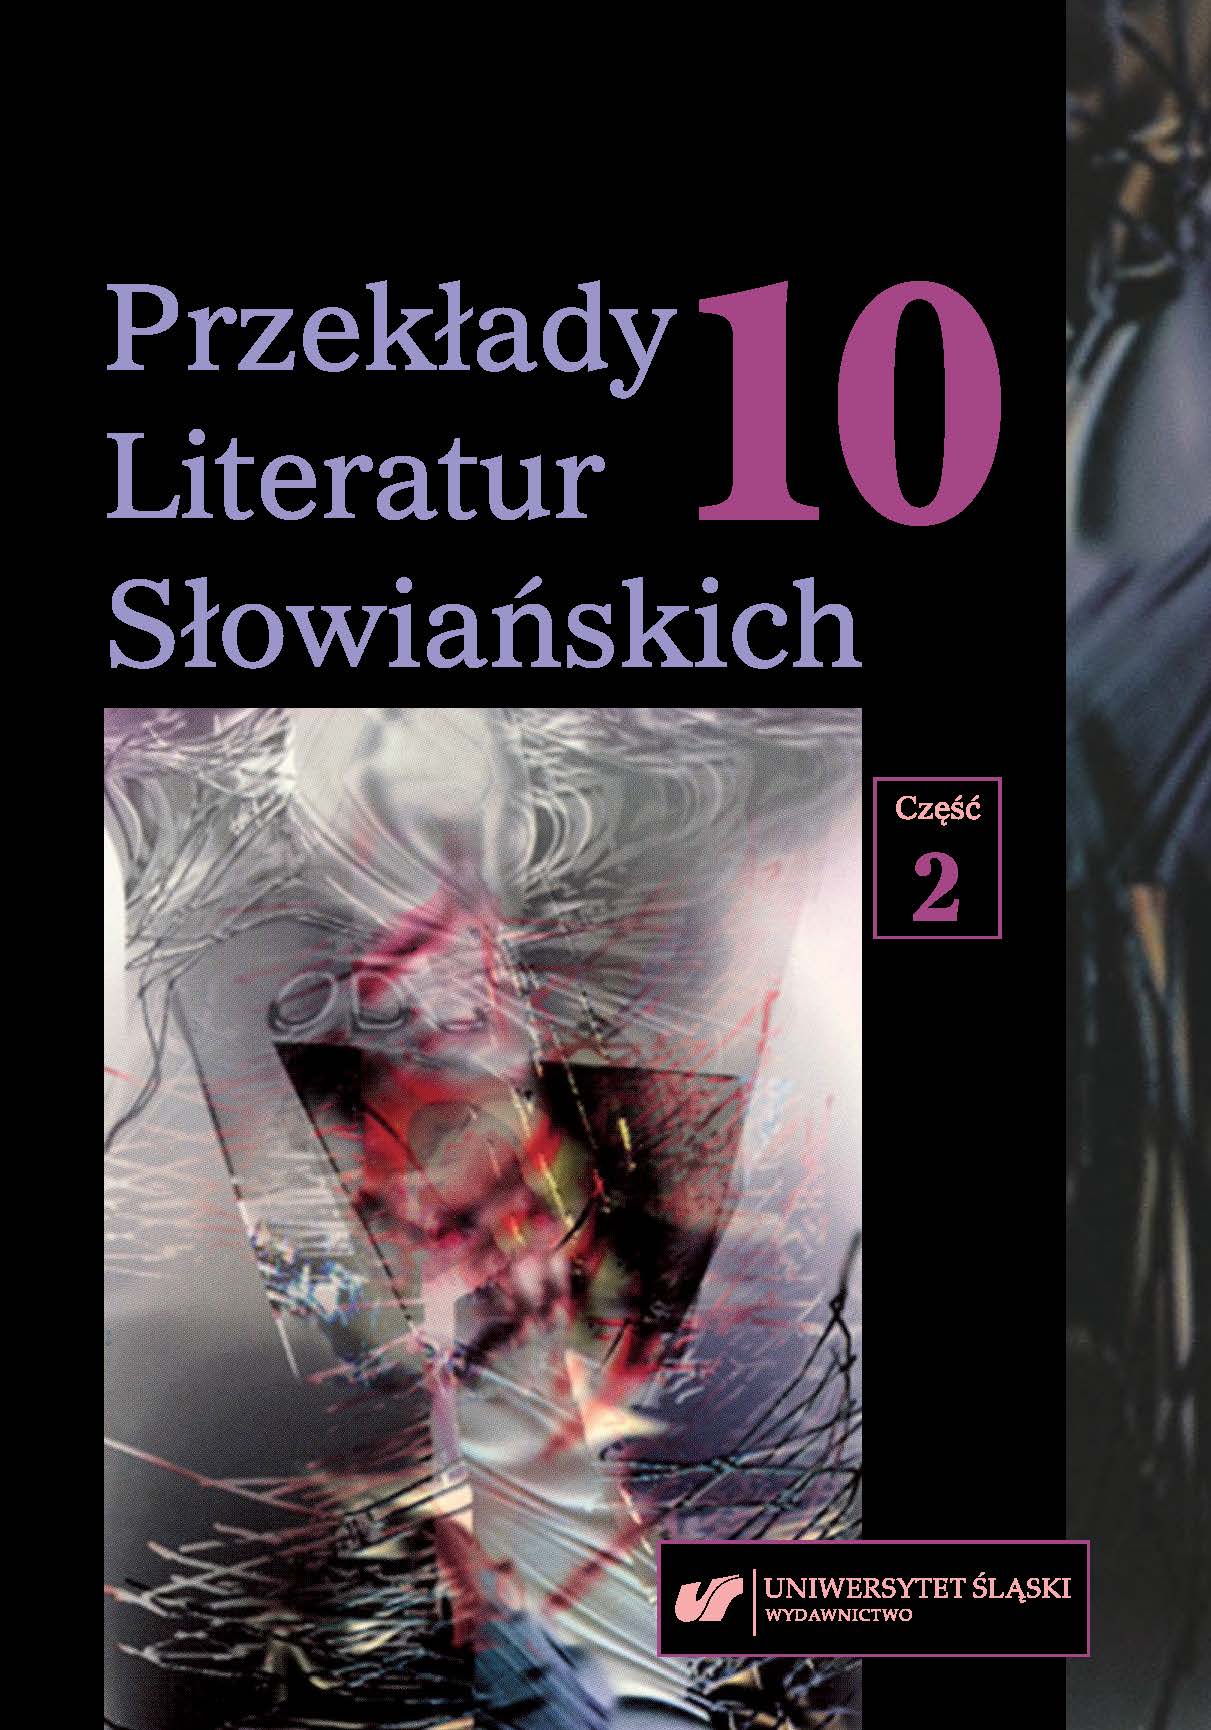 Bibliography of translations of Bulgarian literature in Poland in 2018 Cover Image